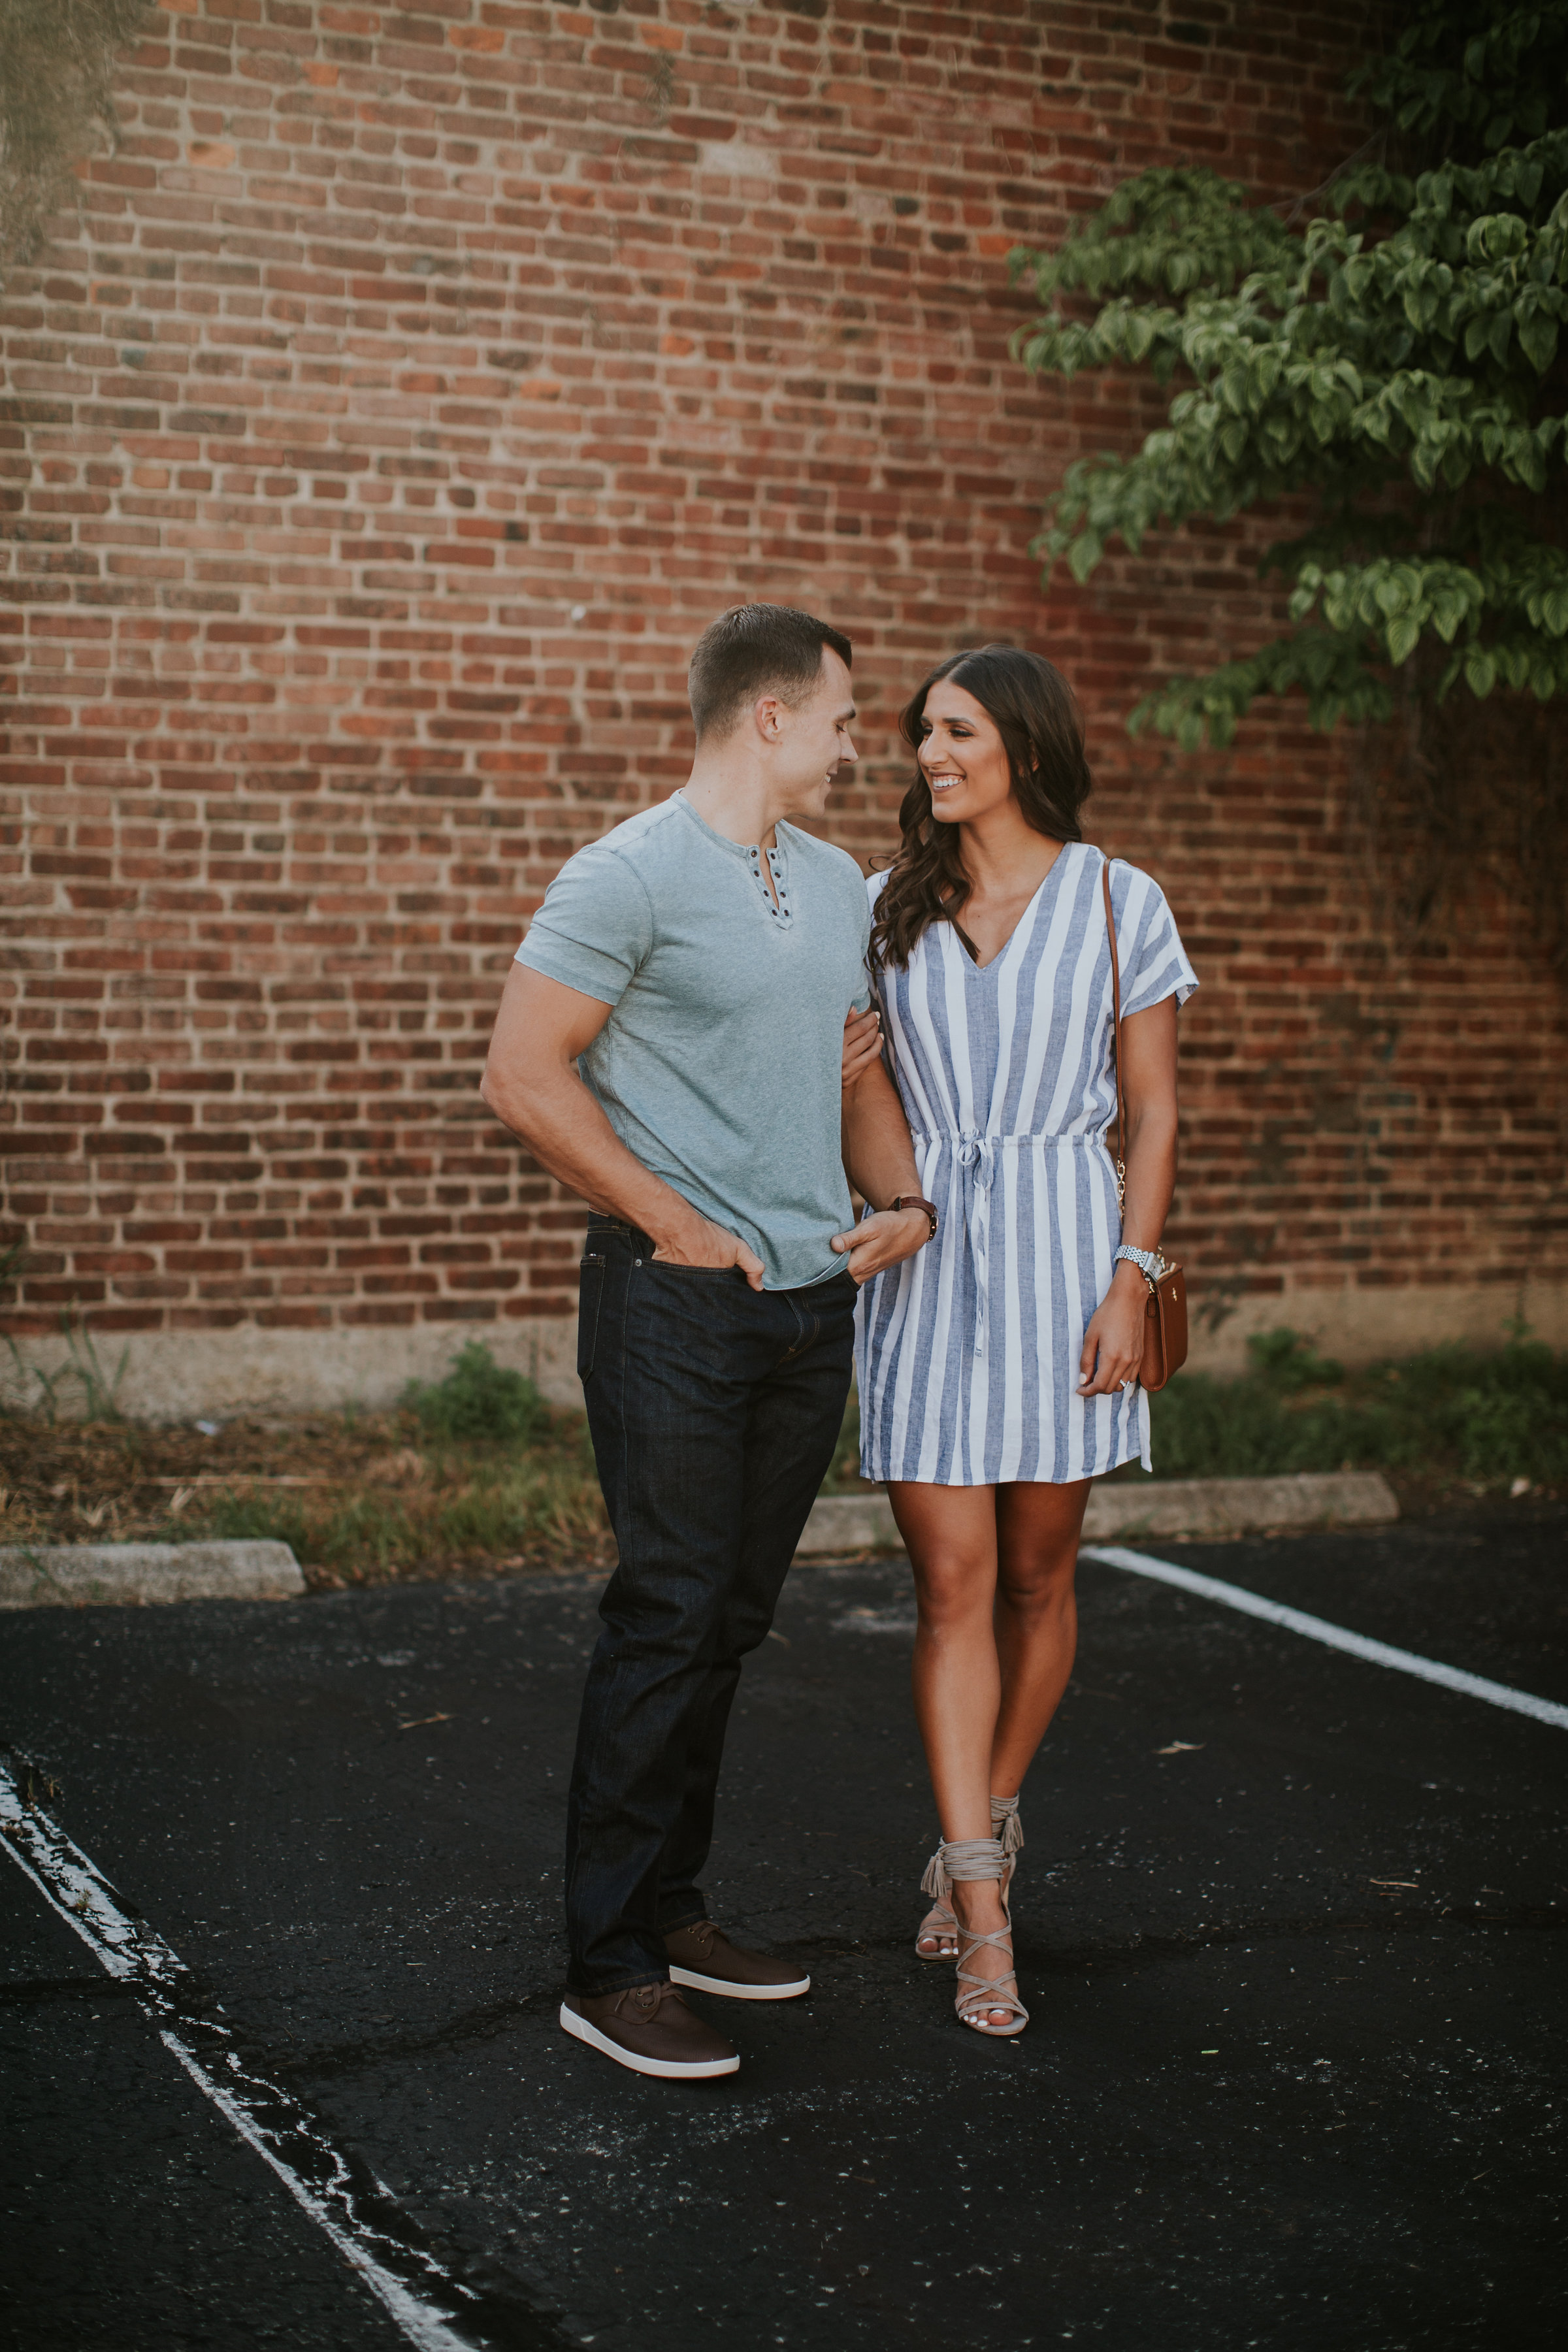 grace wainwright wedding, a southern drawl wedding, grace white wedding, grace and jordan white, men's nordstrom anniversary sale finds, couples shoot, couples session, a southern drawl engagement, jordan white louisville, grace white louisville, grace wainwright louisville, nordstrom anniversary sale men, 2018 nordstrom anniversary sale public access, shop nordstrom, nordstrom shoes, nordstrom dresses, nordstrom handbag sale, nordstrom anniversary sale dates, Nordstrom Anniversary Sale 2018, nordstrom anniversary sale picks, nordstrom anniversary sale catalog, sale picks for nordstrom anniversary sale 2018, information on nordstrom anniversary sale, nordstrom credit card, nordstrom debit card, nordstrom rewards, nordstrom sale, nordstrom anniversary sale finds, nsale finds, nsale picks, nike on sale, cute fall outfit, fall style, fall inspo, fall sale // grace wainwright a southern drawl  